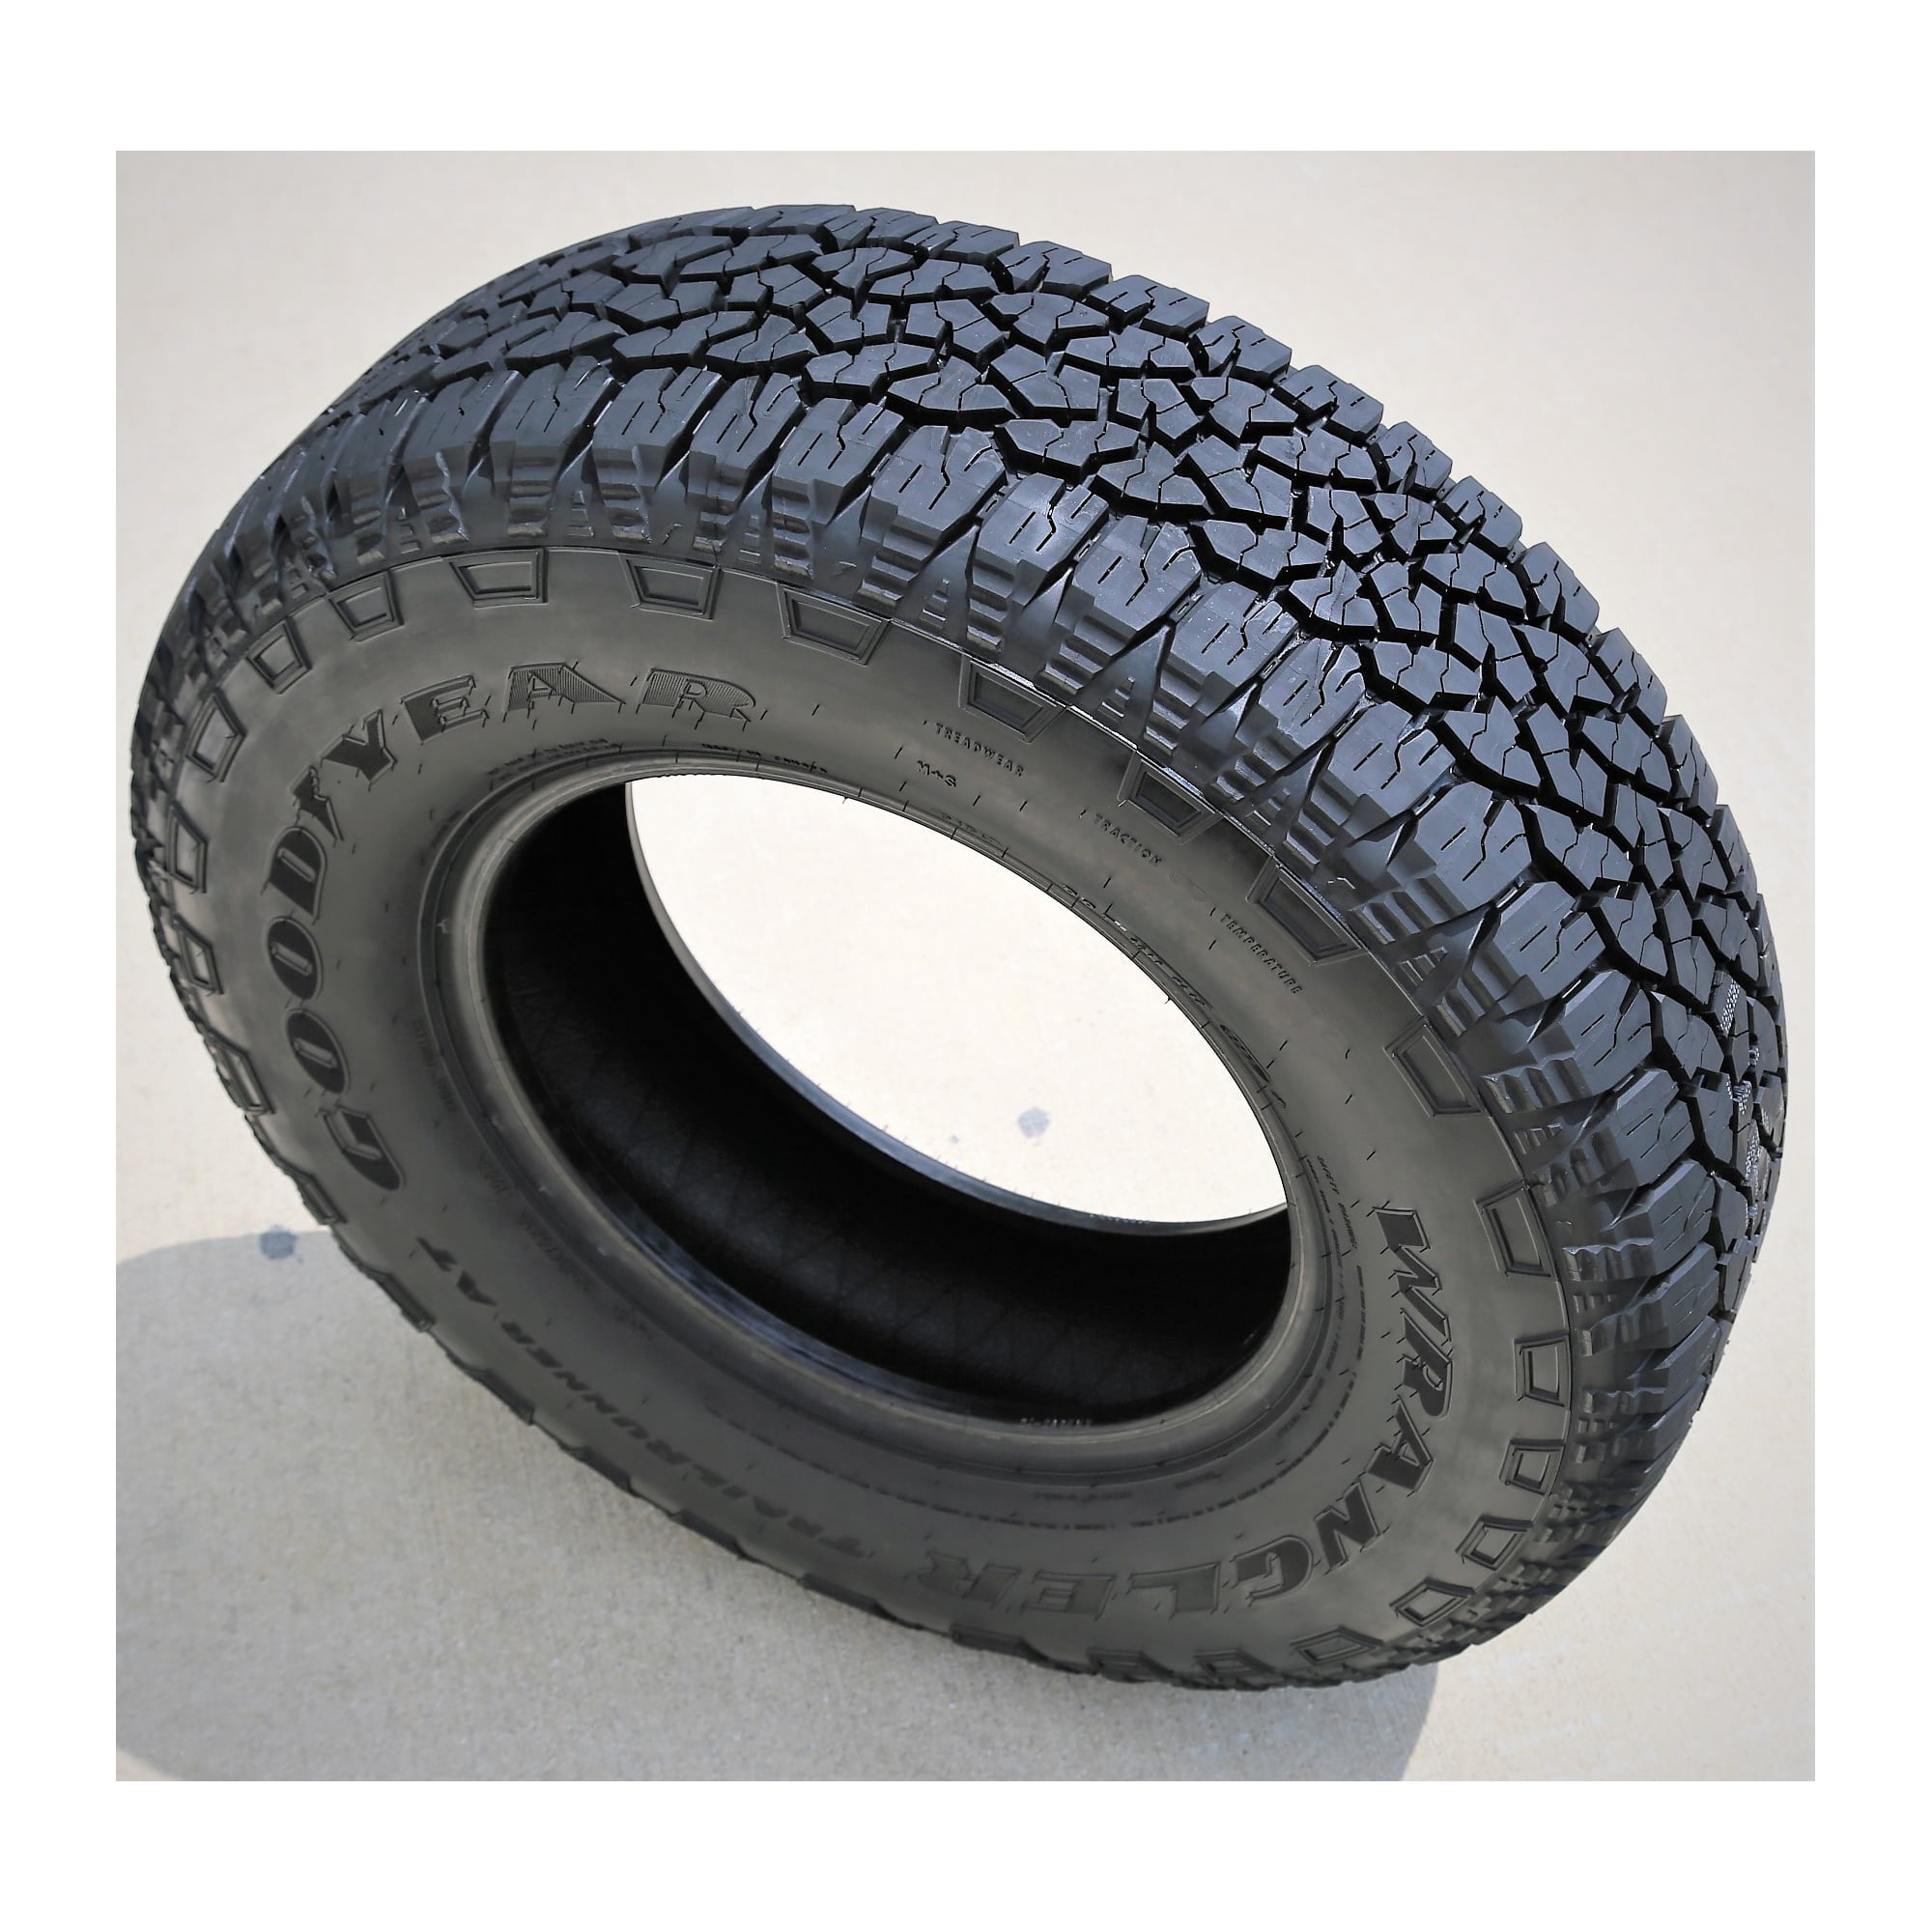 Buy Goodyear Wrangler Trailrunner At 275/60R20 115S Tire Online at Lowest  Price in Ubuy Mexico. 306756769